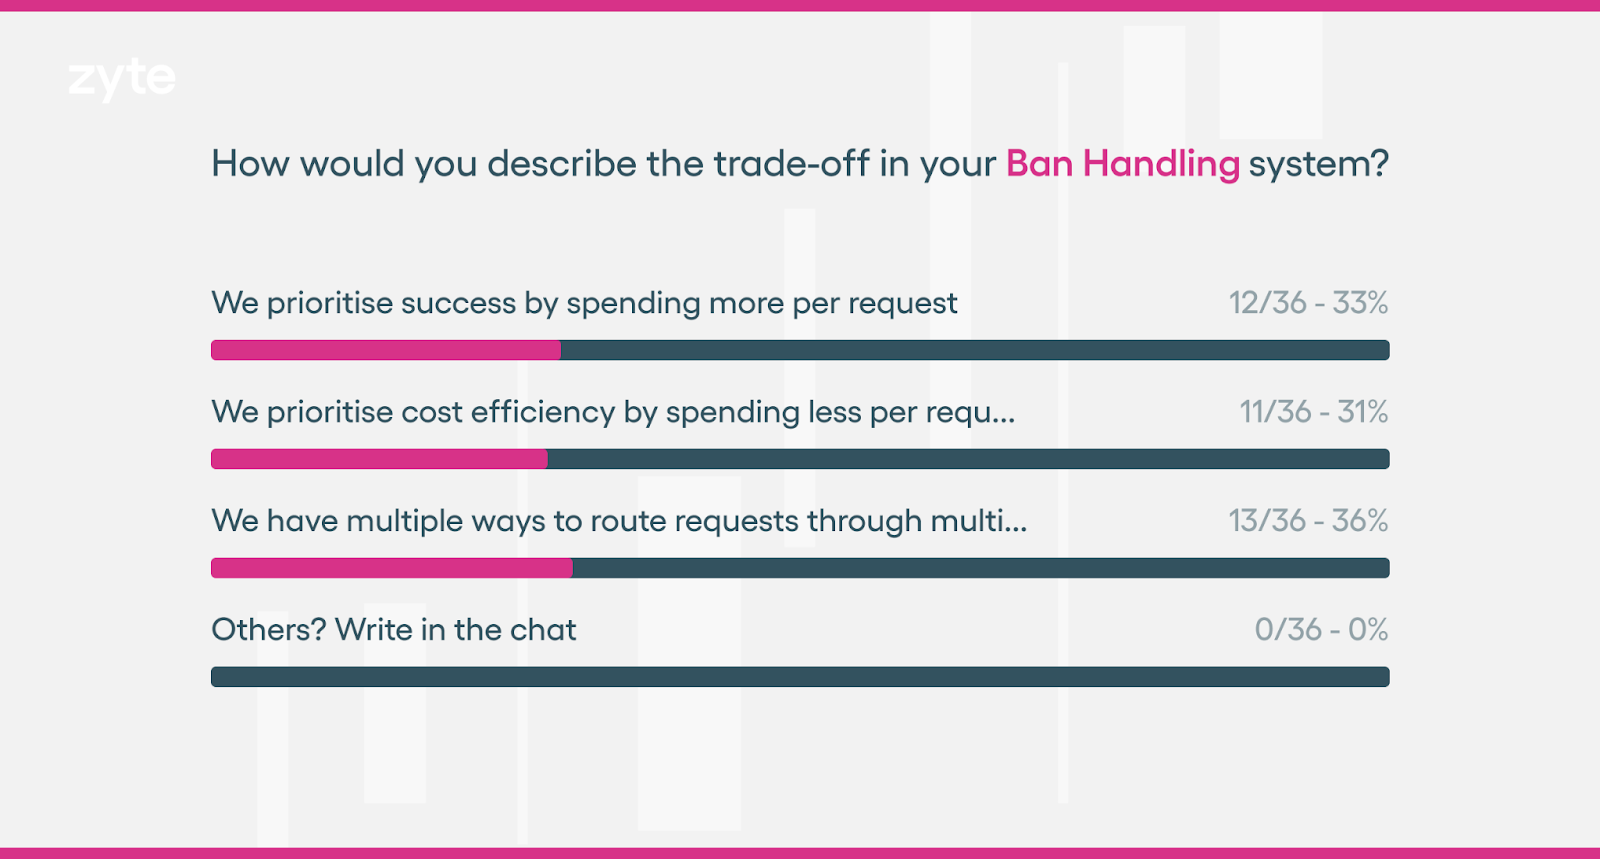 A visual representation of the answers to the question "How would you describe the trade-offs in your ban handling system?"